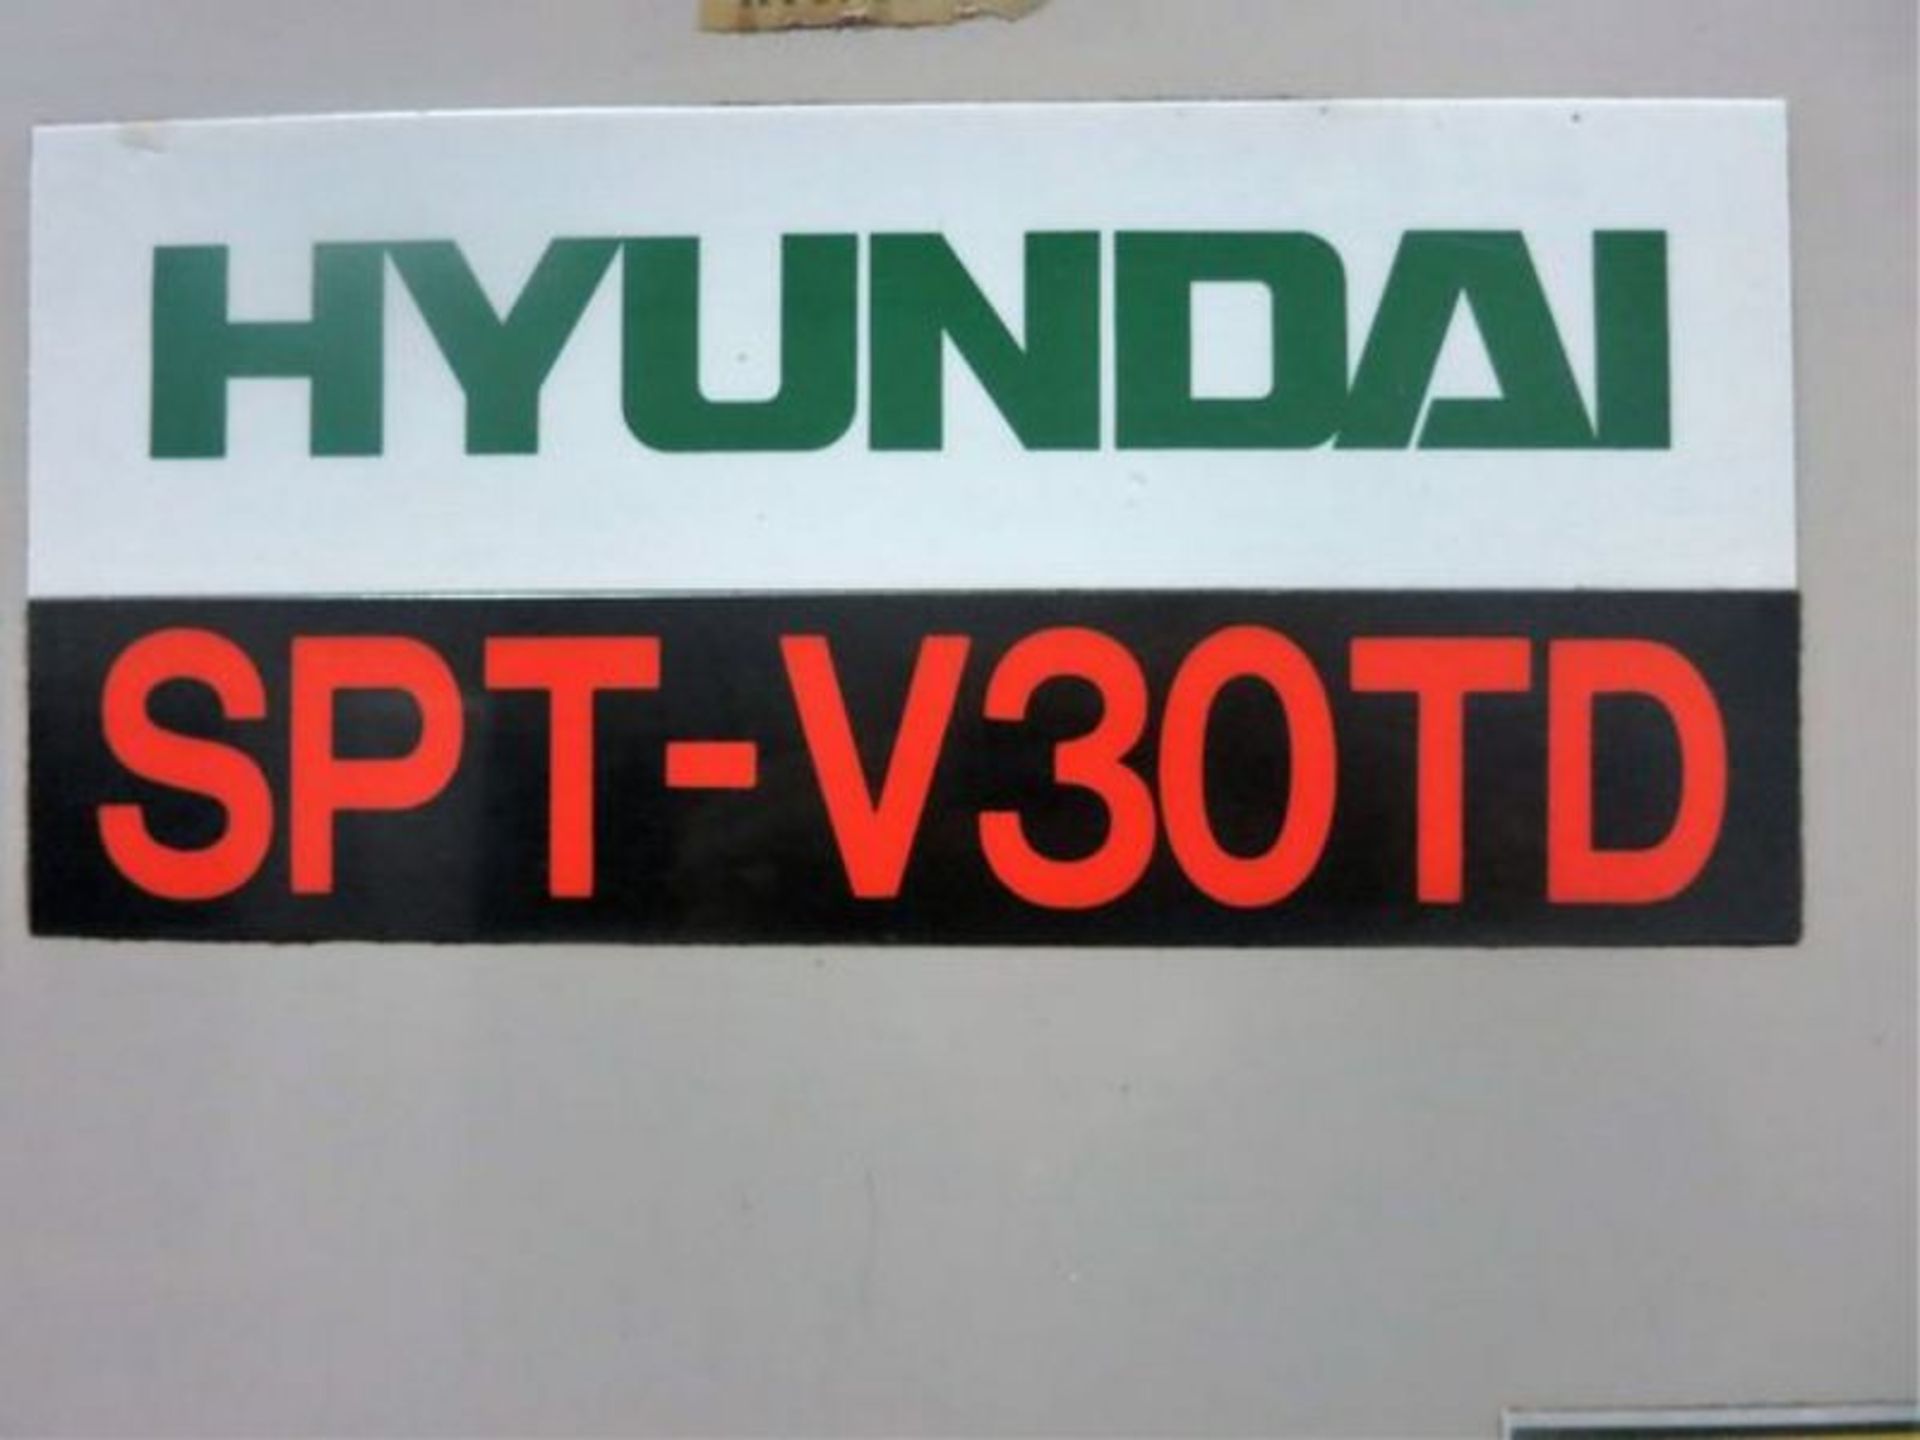 HYUNDAI MODEL SPTV30TD CNC TAPMILL CENTER WITH PALLET CHANGER, S/N 73H8056, NEW 1999 Table size 35. - Image 10 of 10